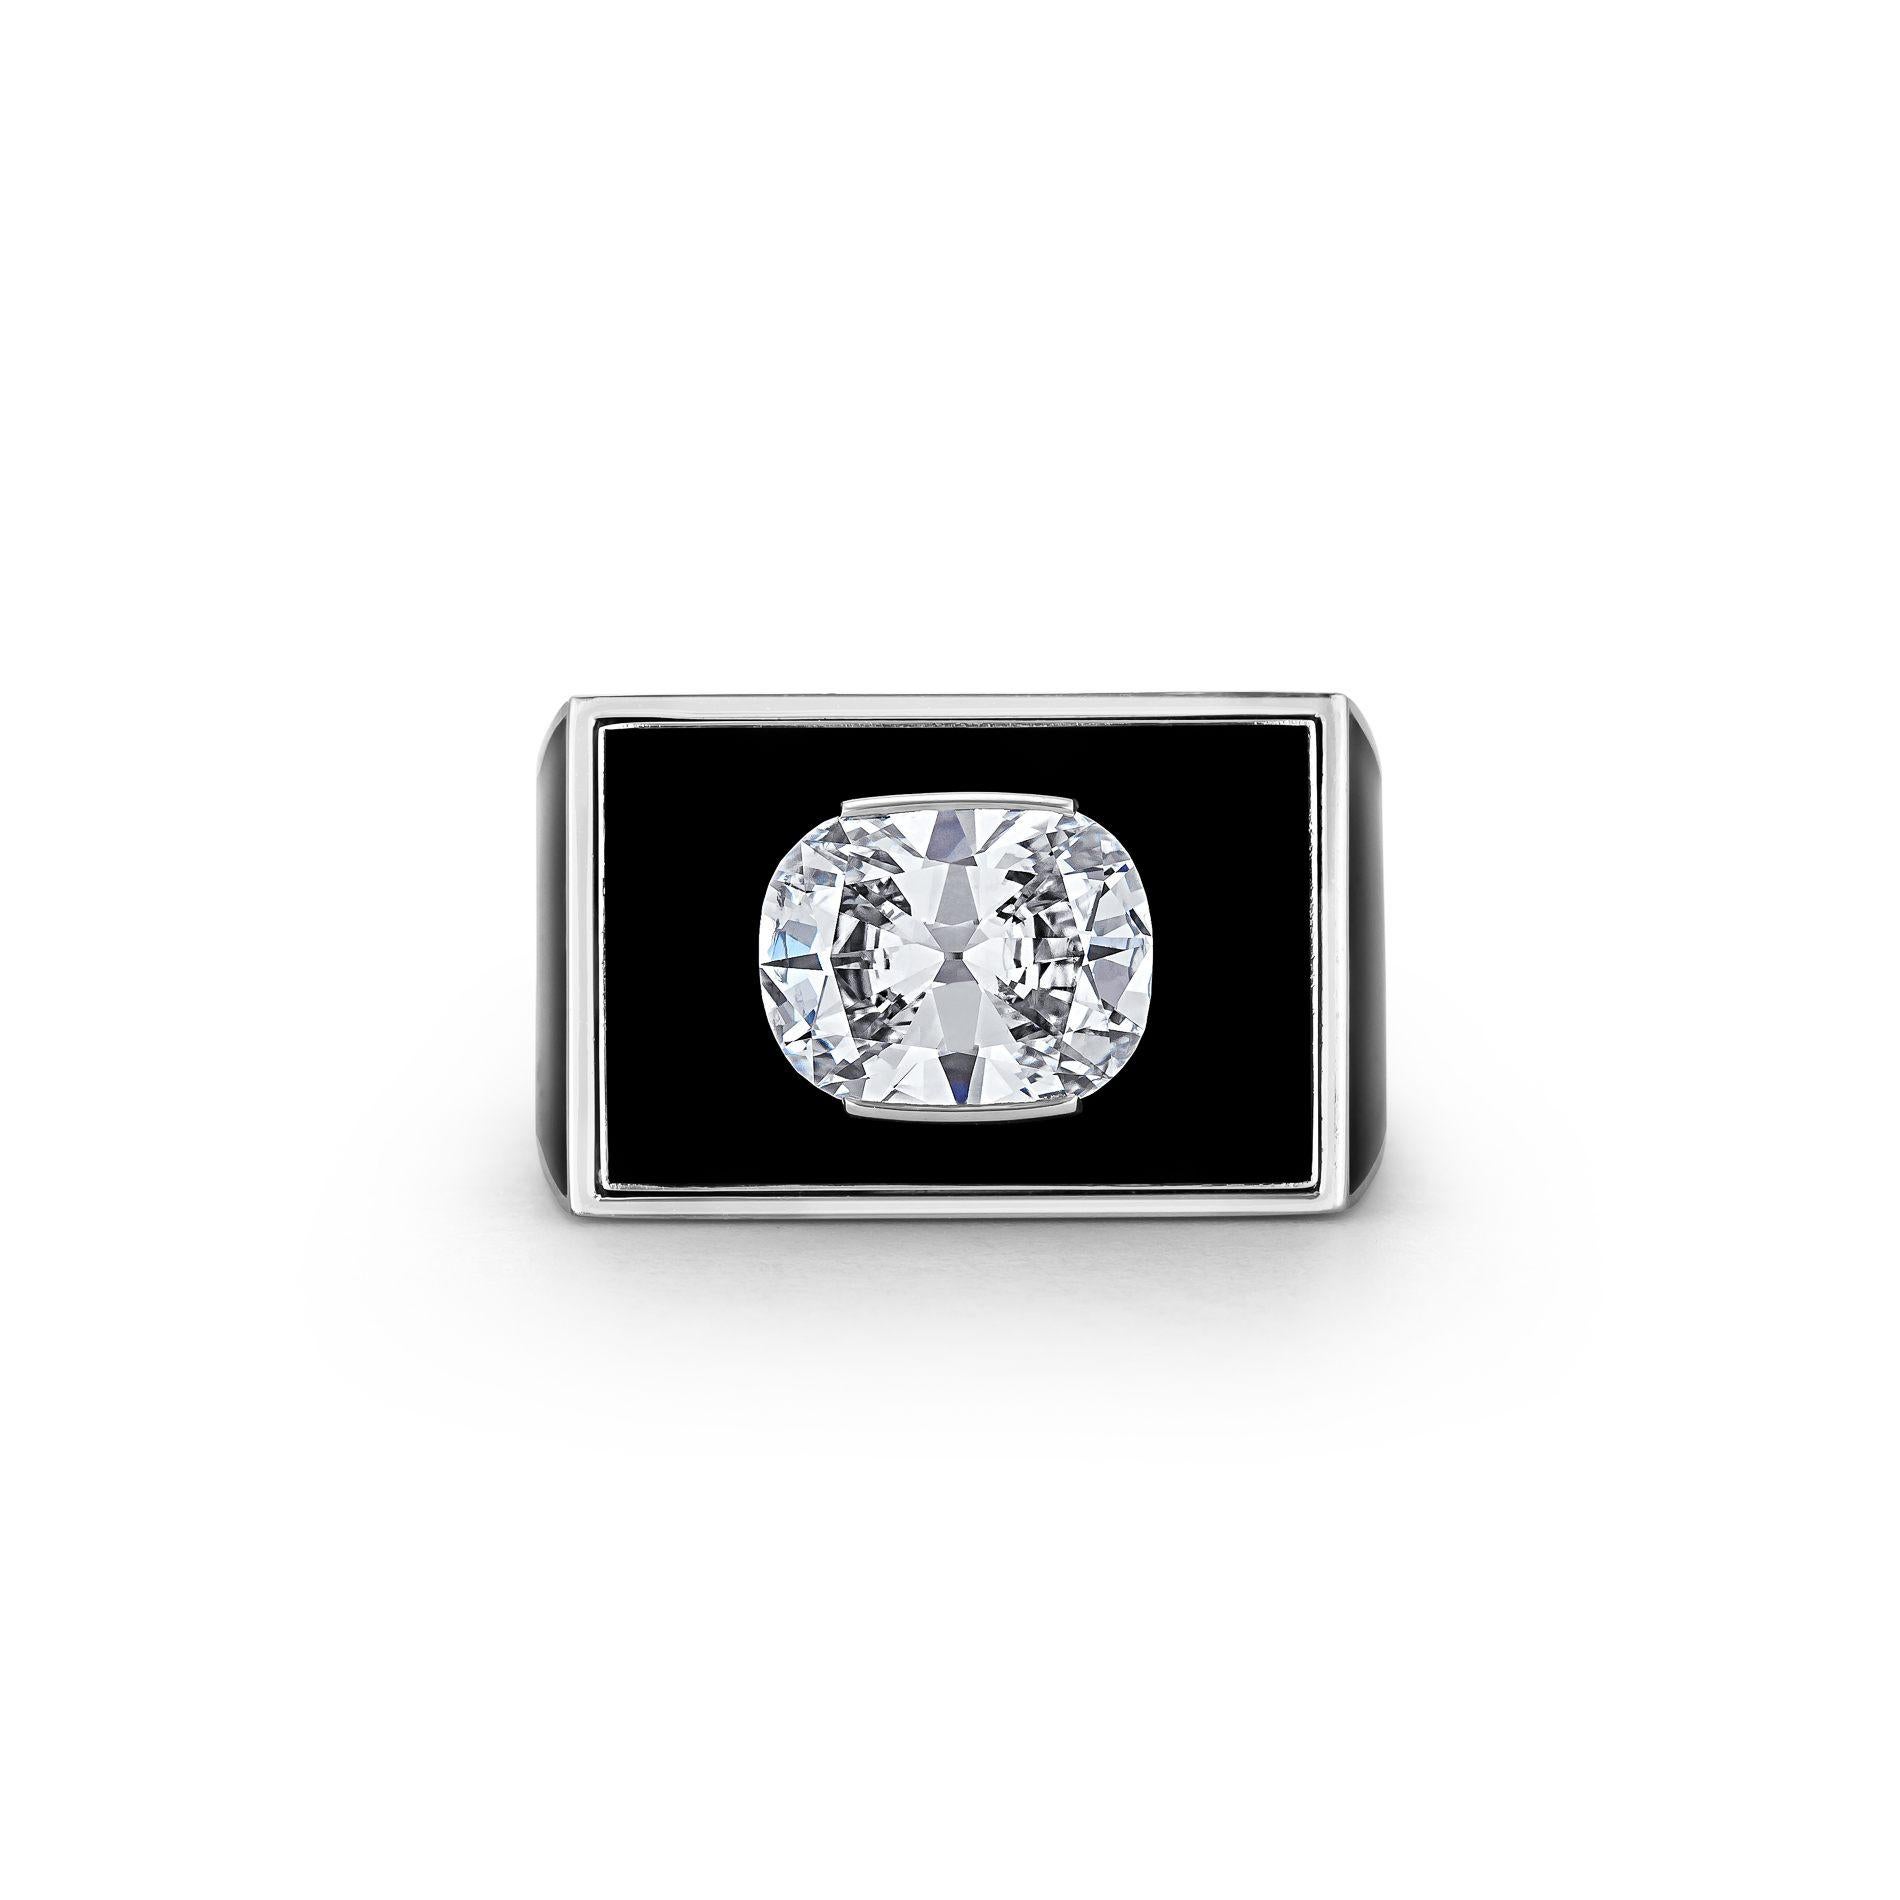 This ring is simply a matter of black and white.  With a shiny black lacquer finish and a vivid white cushion brilliant cut center diamond, this ring is architecturally striking and sleekly modern.  Mounted in platinum and 18 karat white gold, this